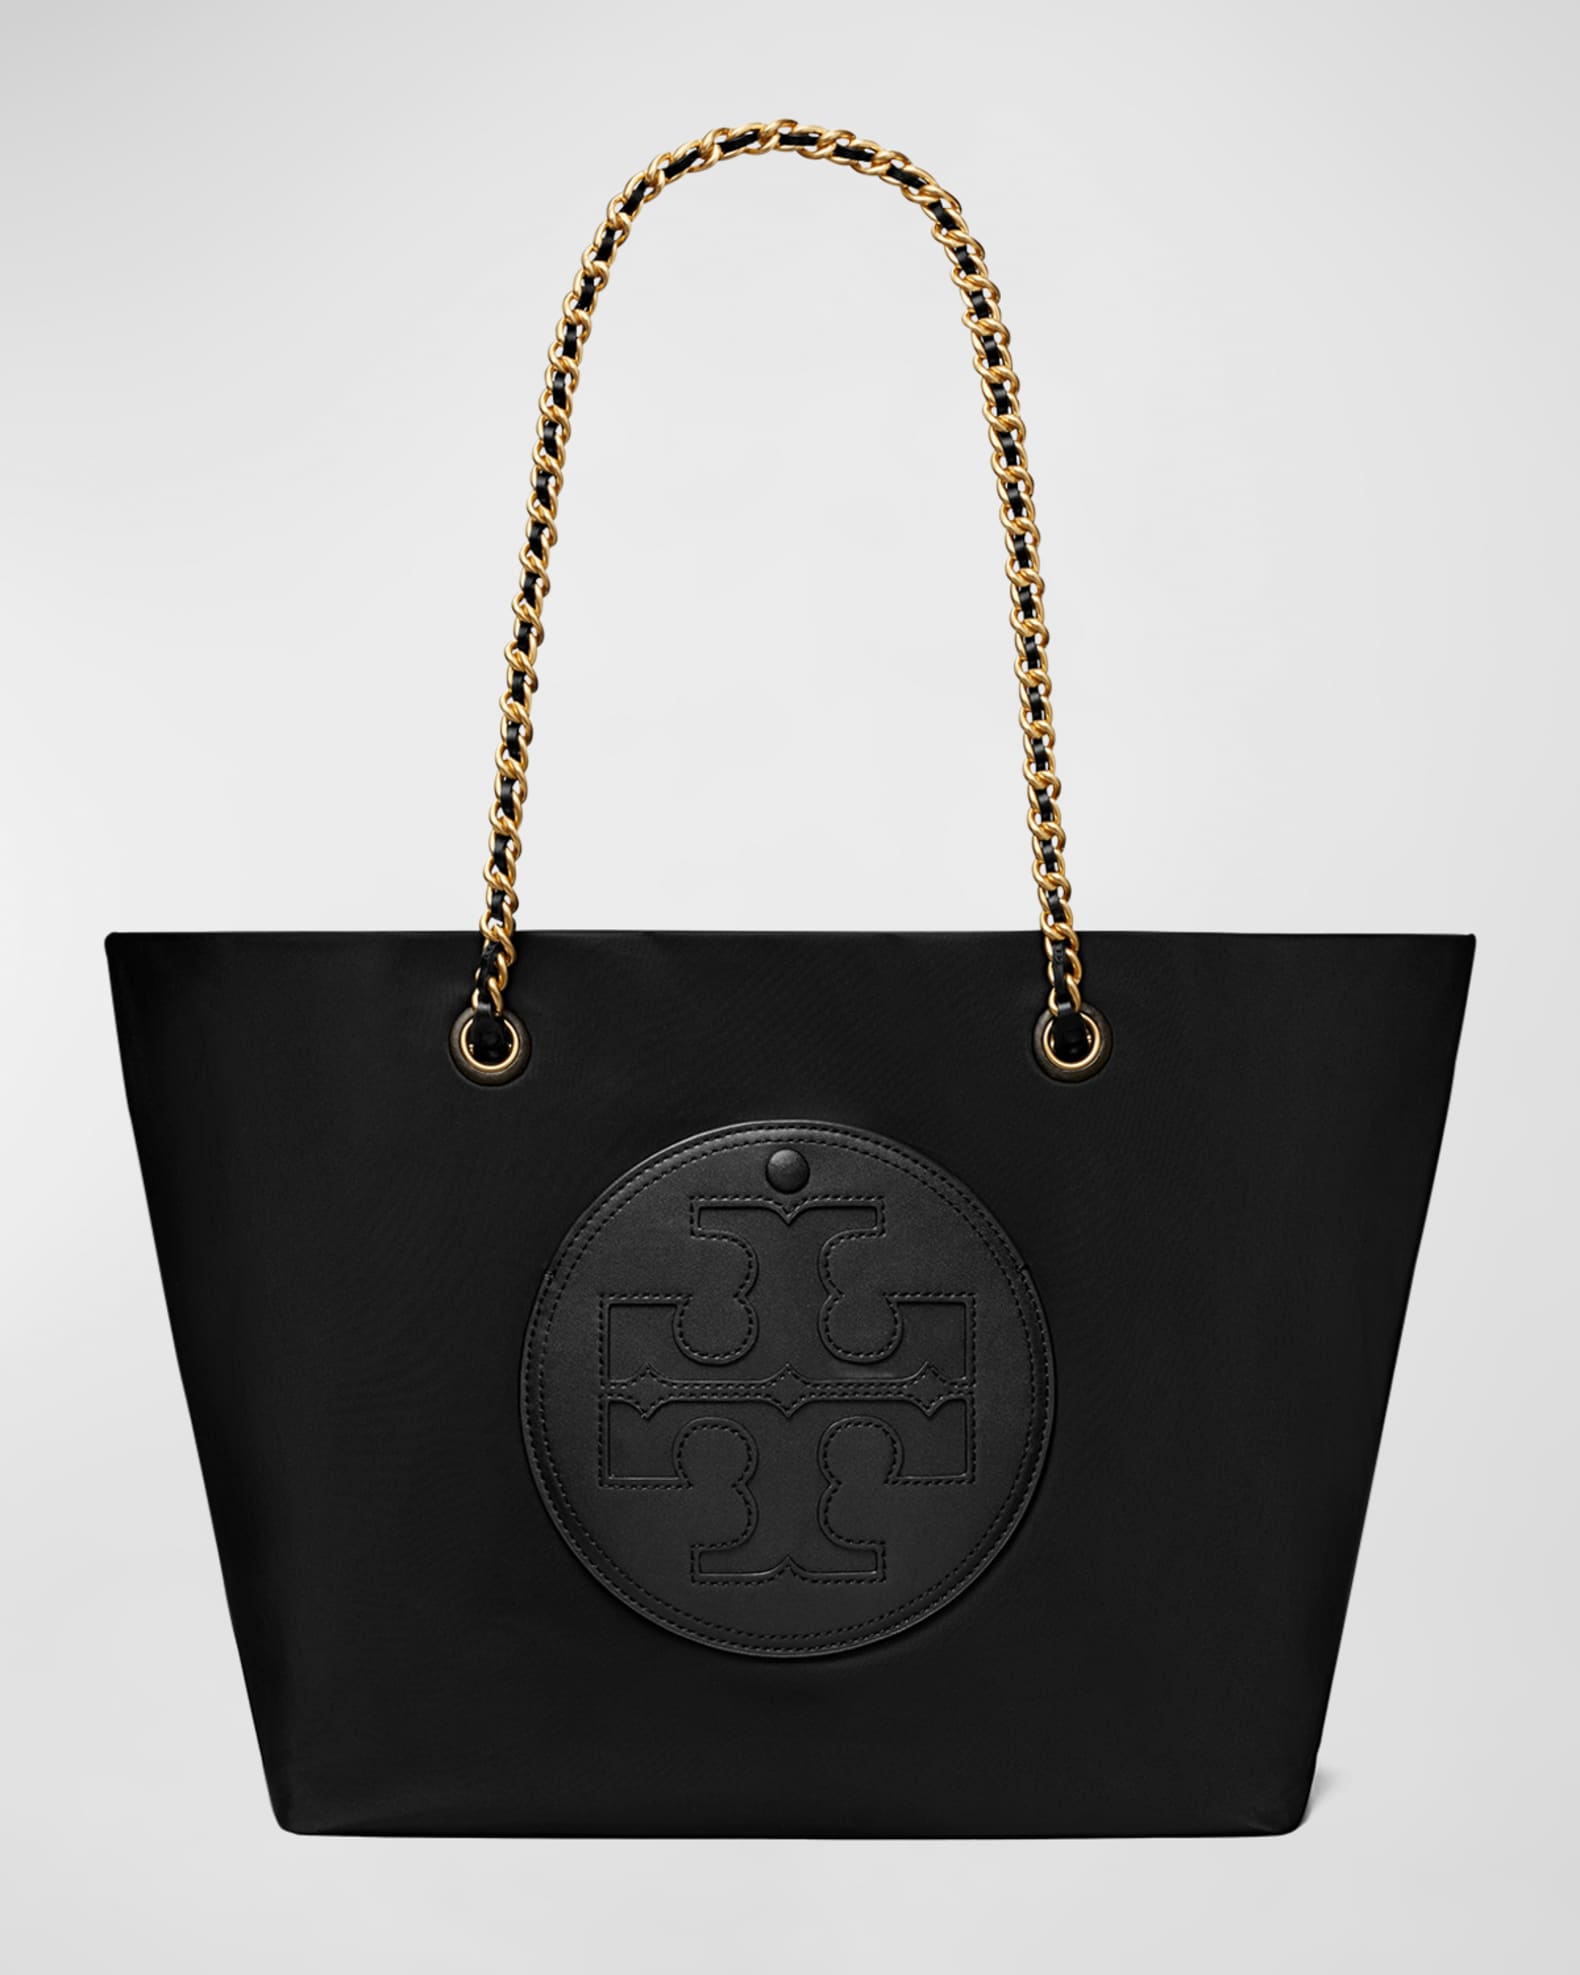 Tory Burch Tote Bag Black Crossbody Large Saffiano Leather